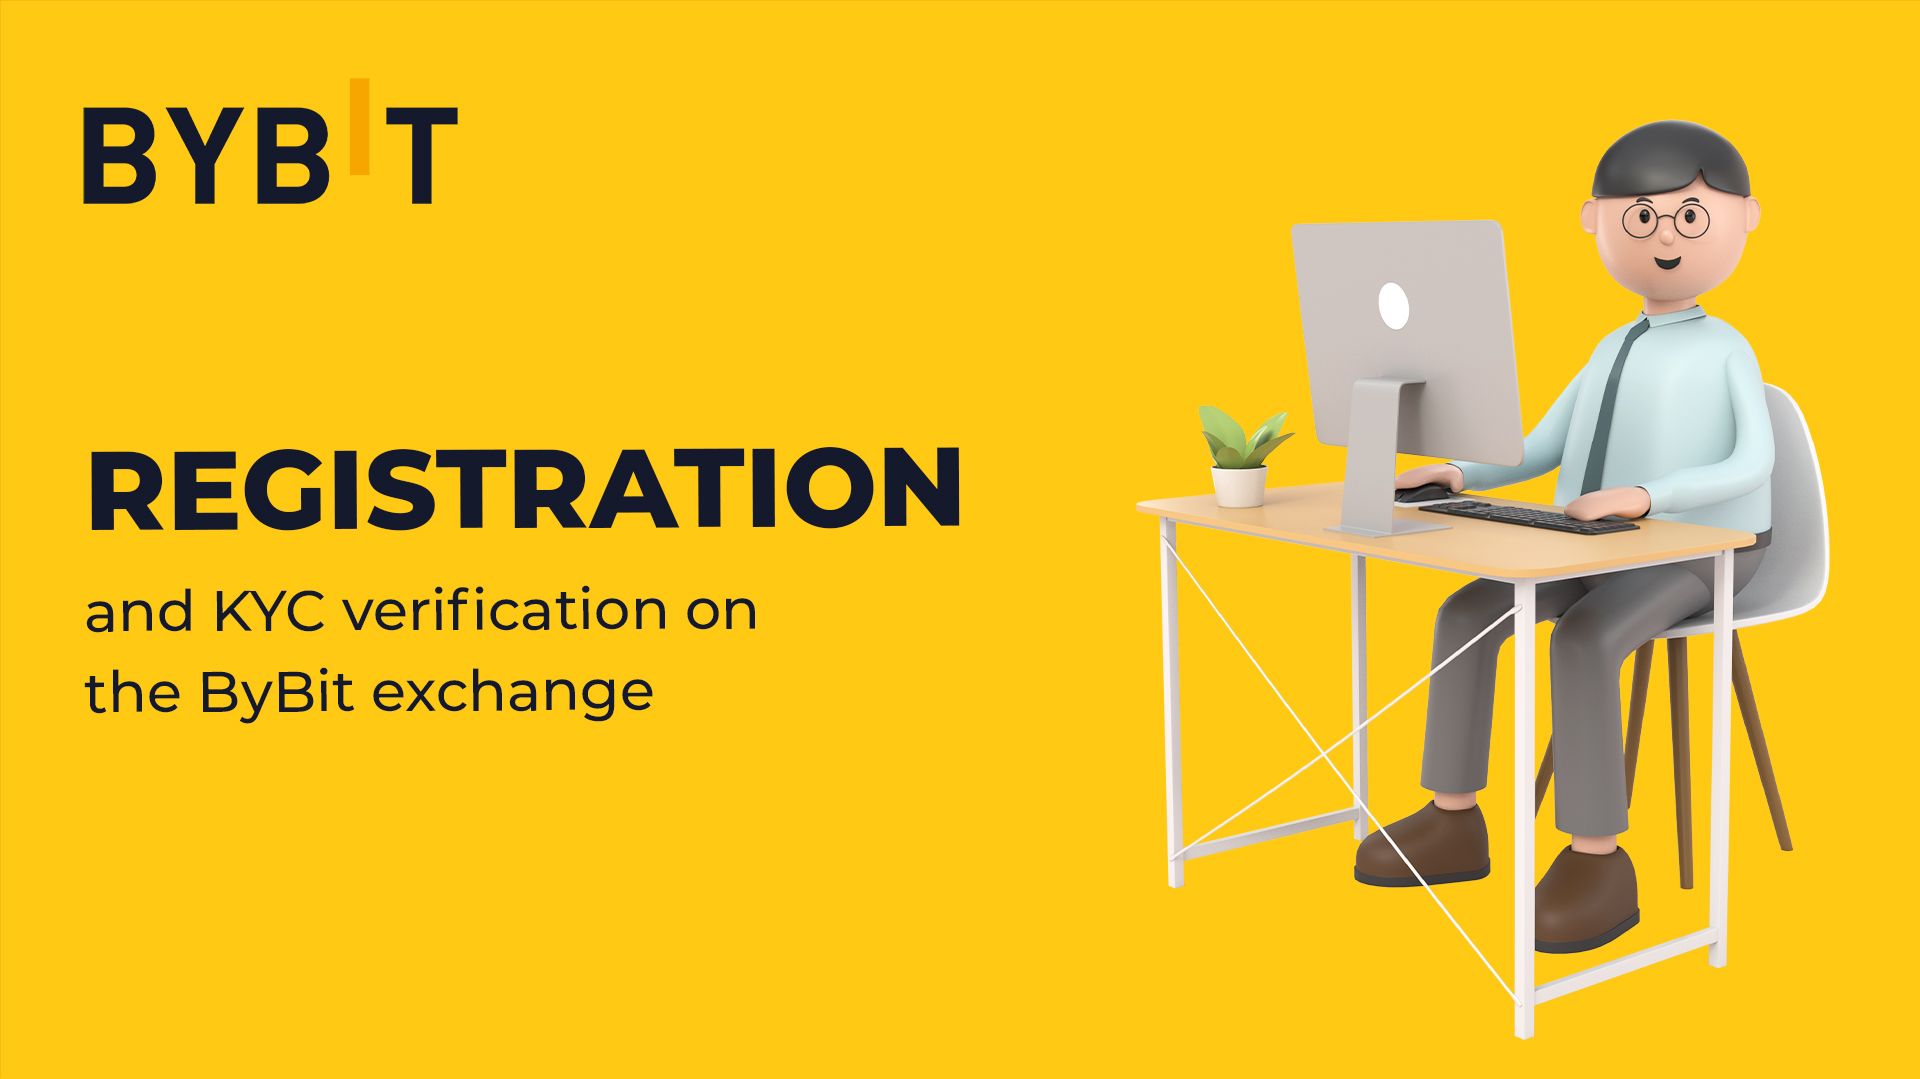 Registration and KYC verification on the Bybit exchange